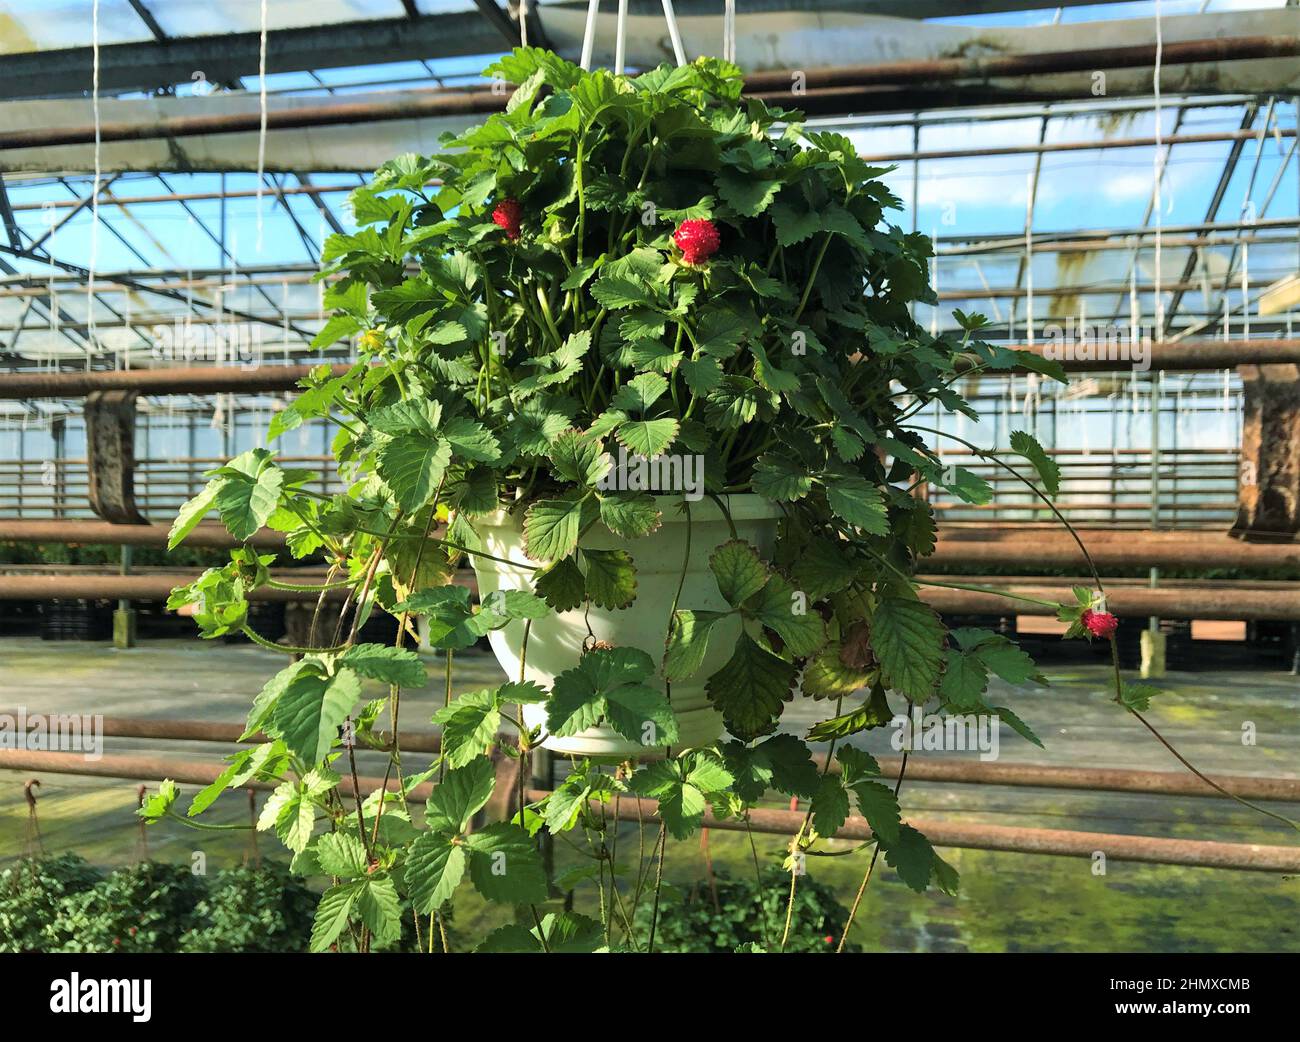 In the greenhouse hanging pot with flowering and fruiting false strawberries Potentilla indica, with large red berries and yellow flowers. Stock Photo